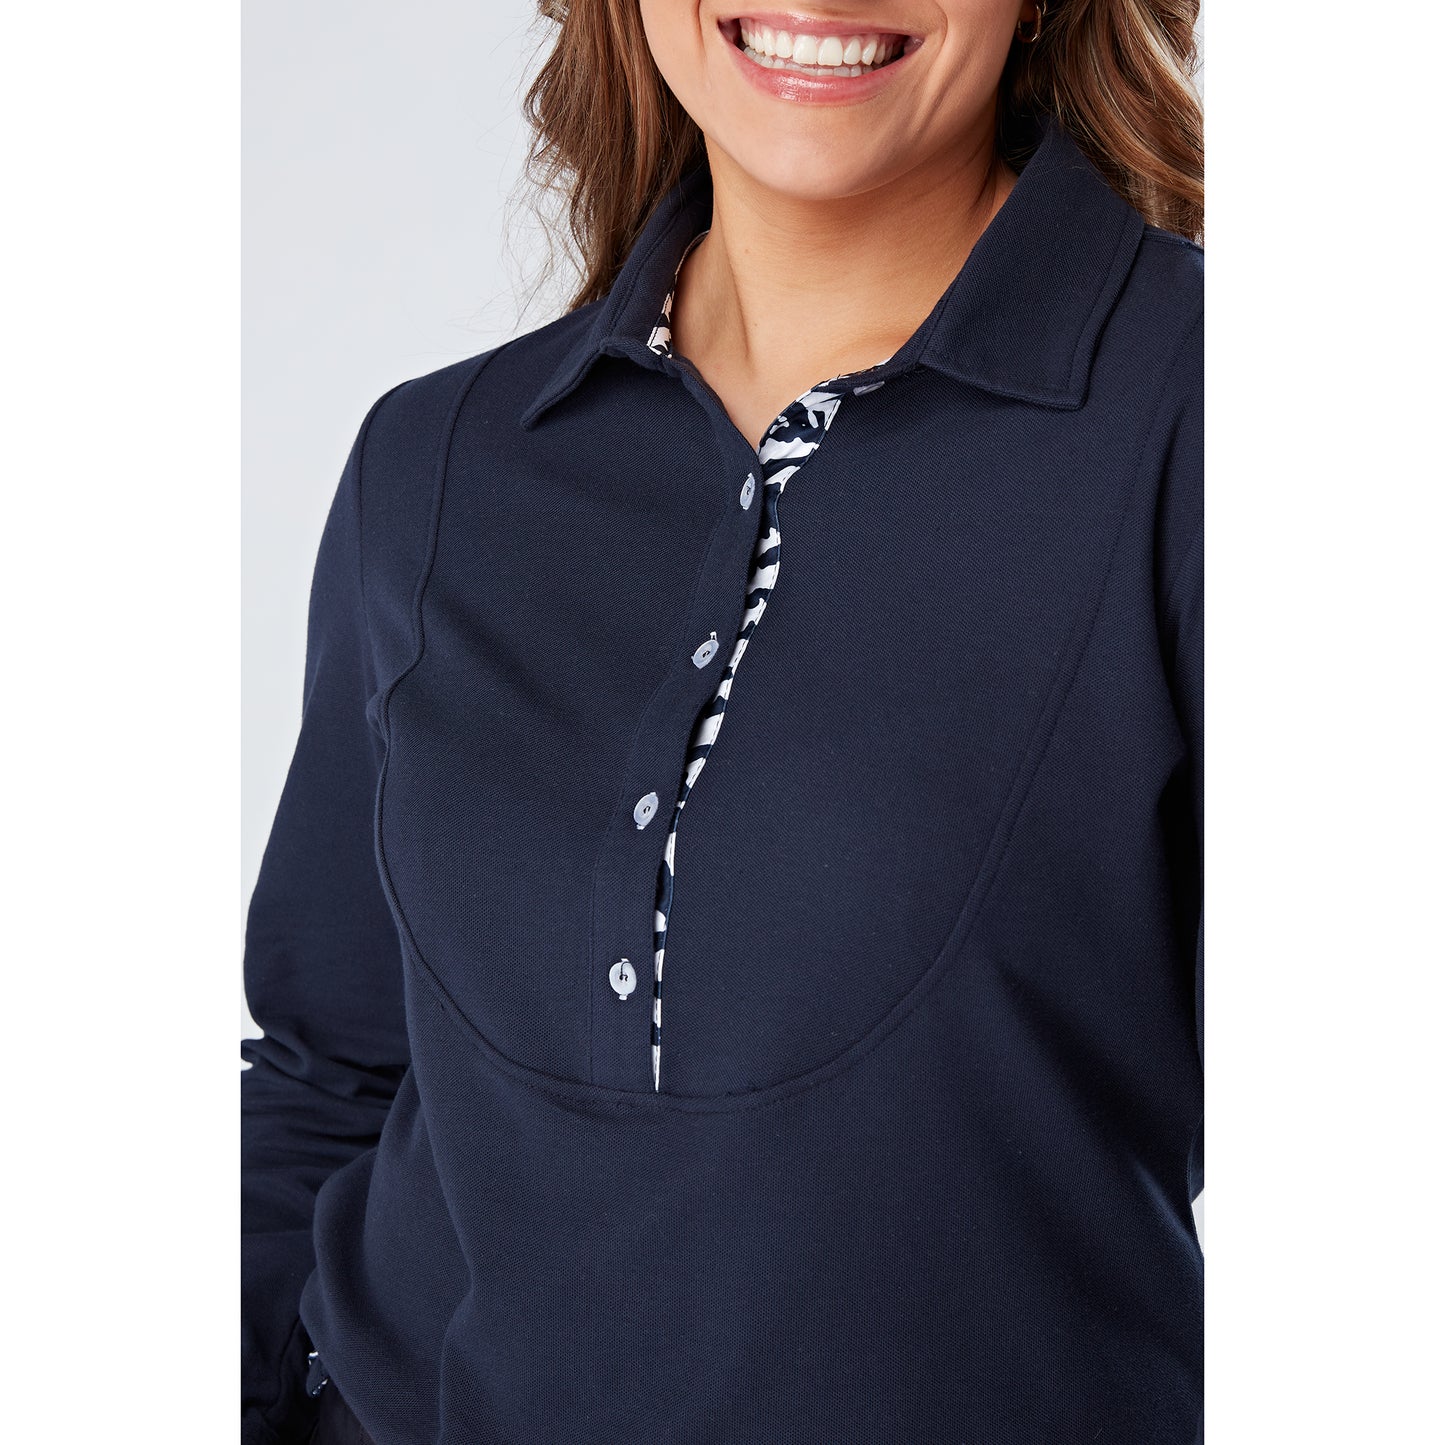 Swing Out Sister Ladies Long Sleeve Polo Shirt with Soft Cotton Finish in Navy Blue